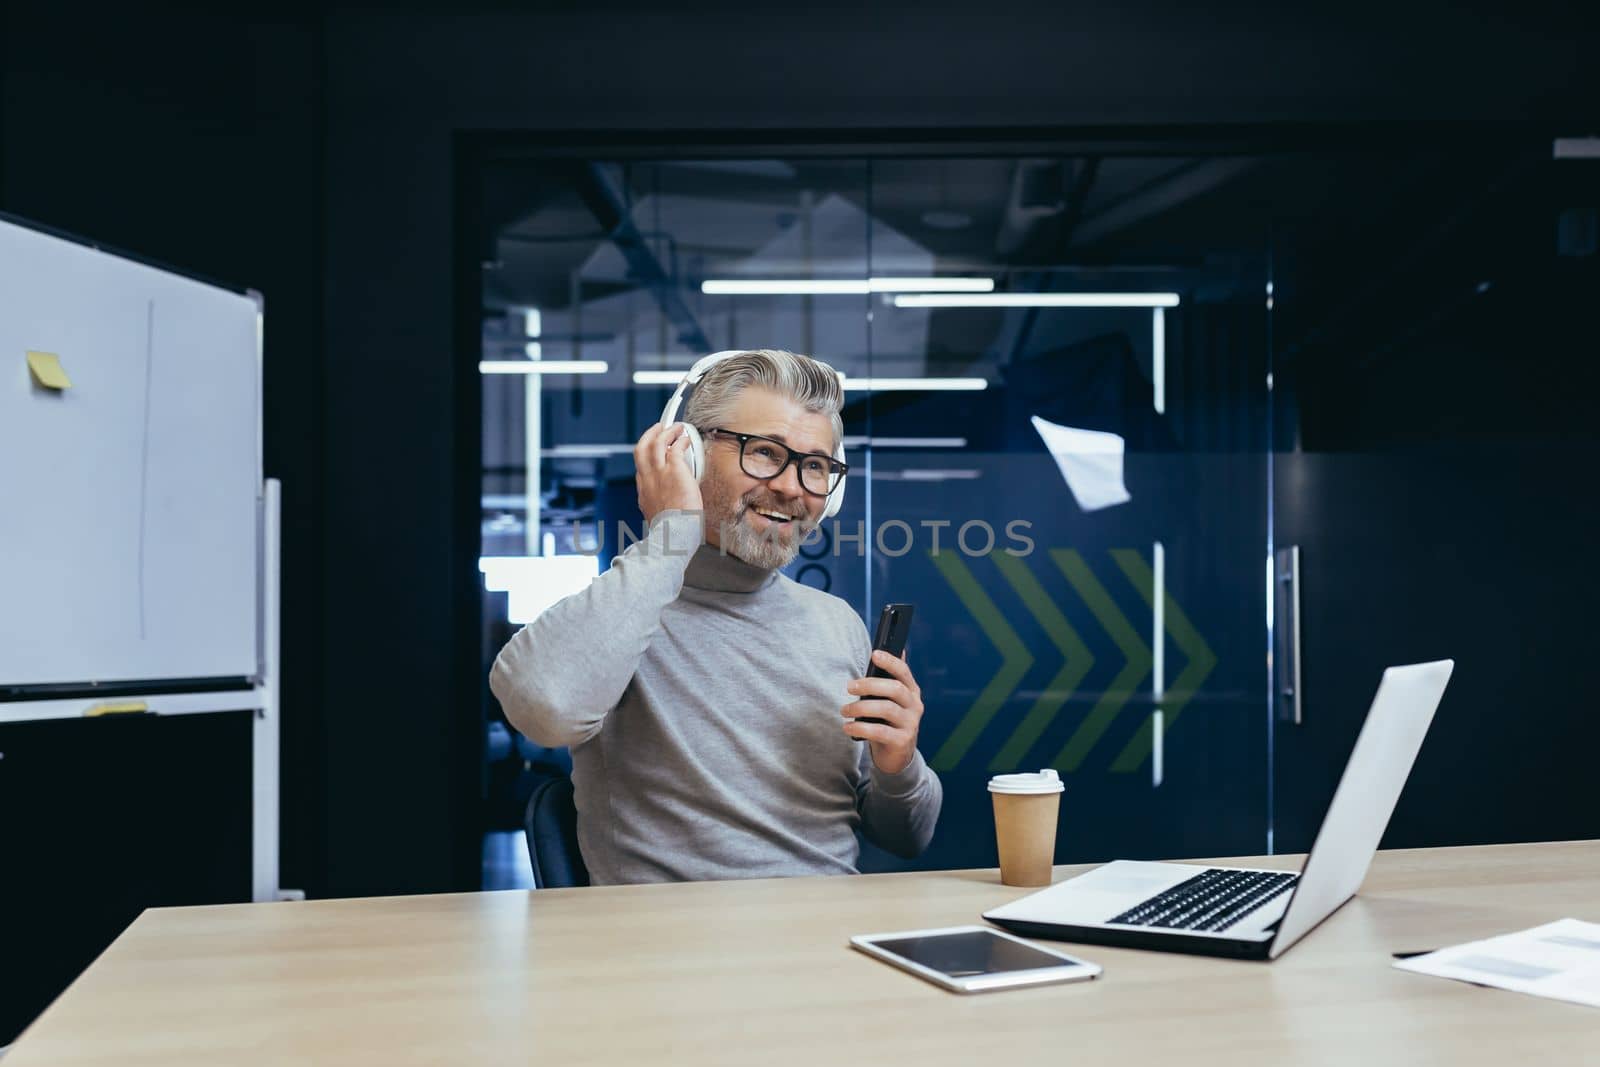 Senior gray haired businessman boss working inside modern office using laptop at work, mature man in headphones listening to music and audiobooks podcasts using app on phone.